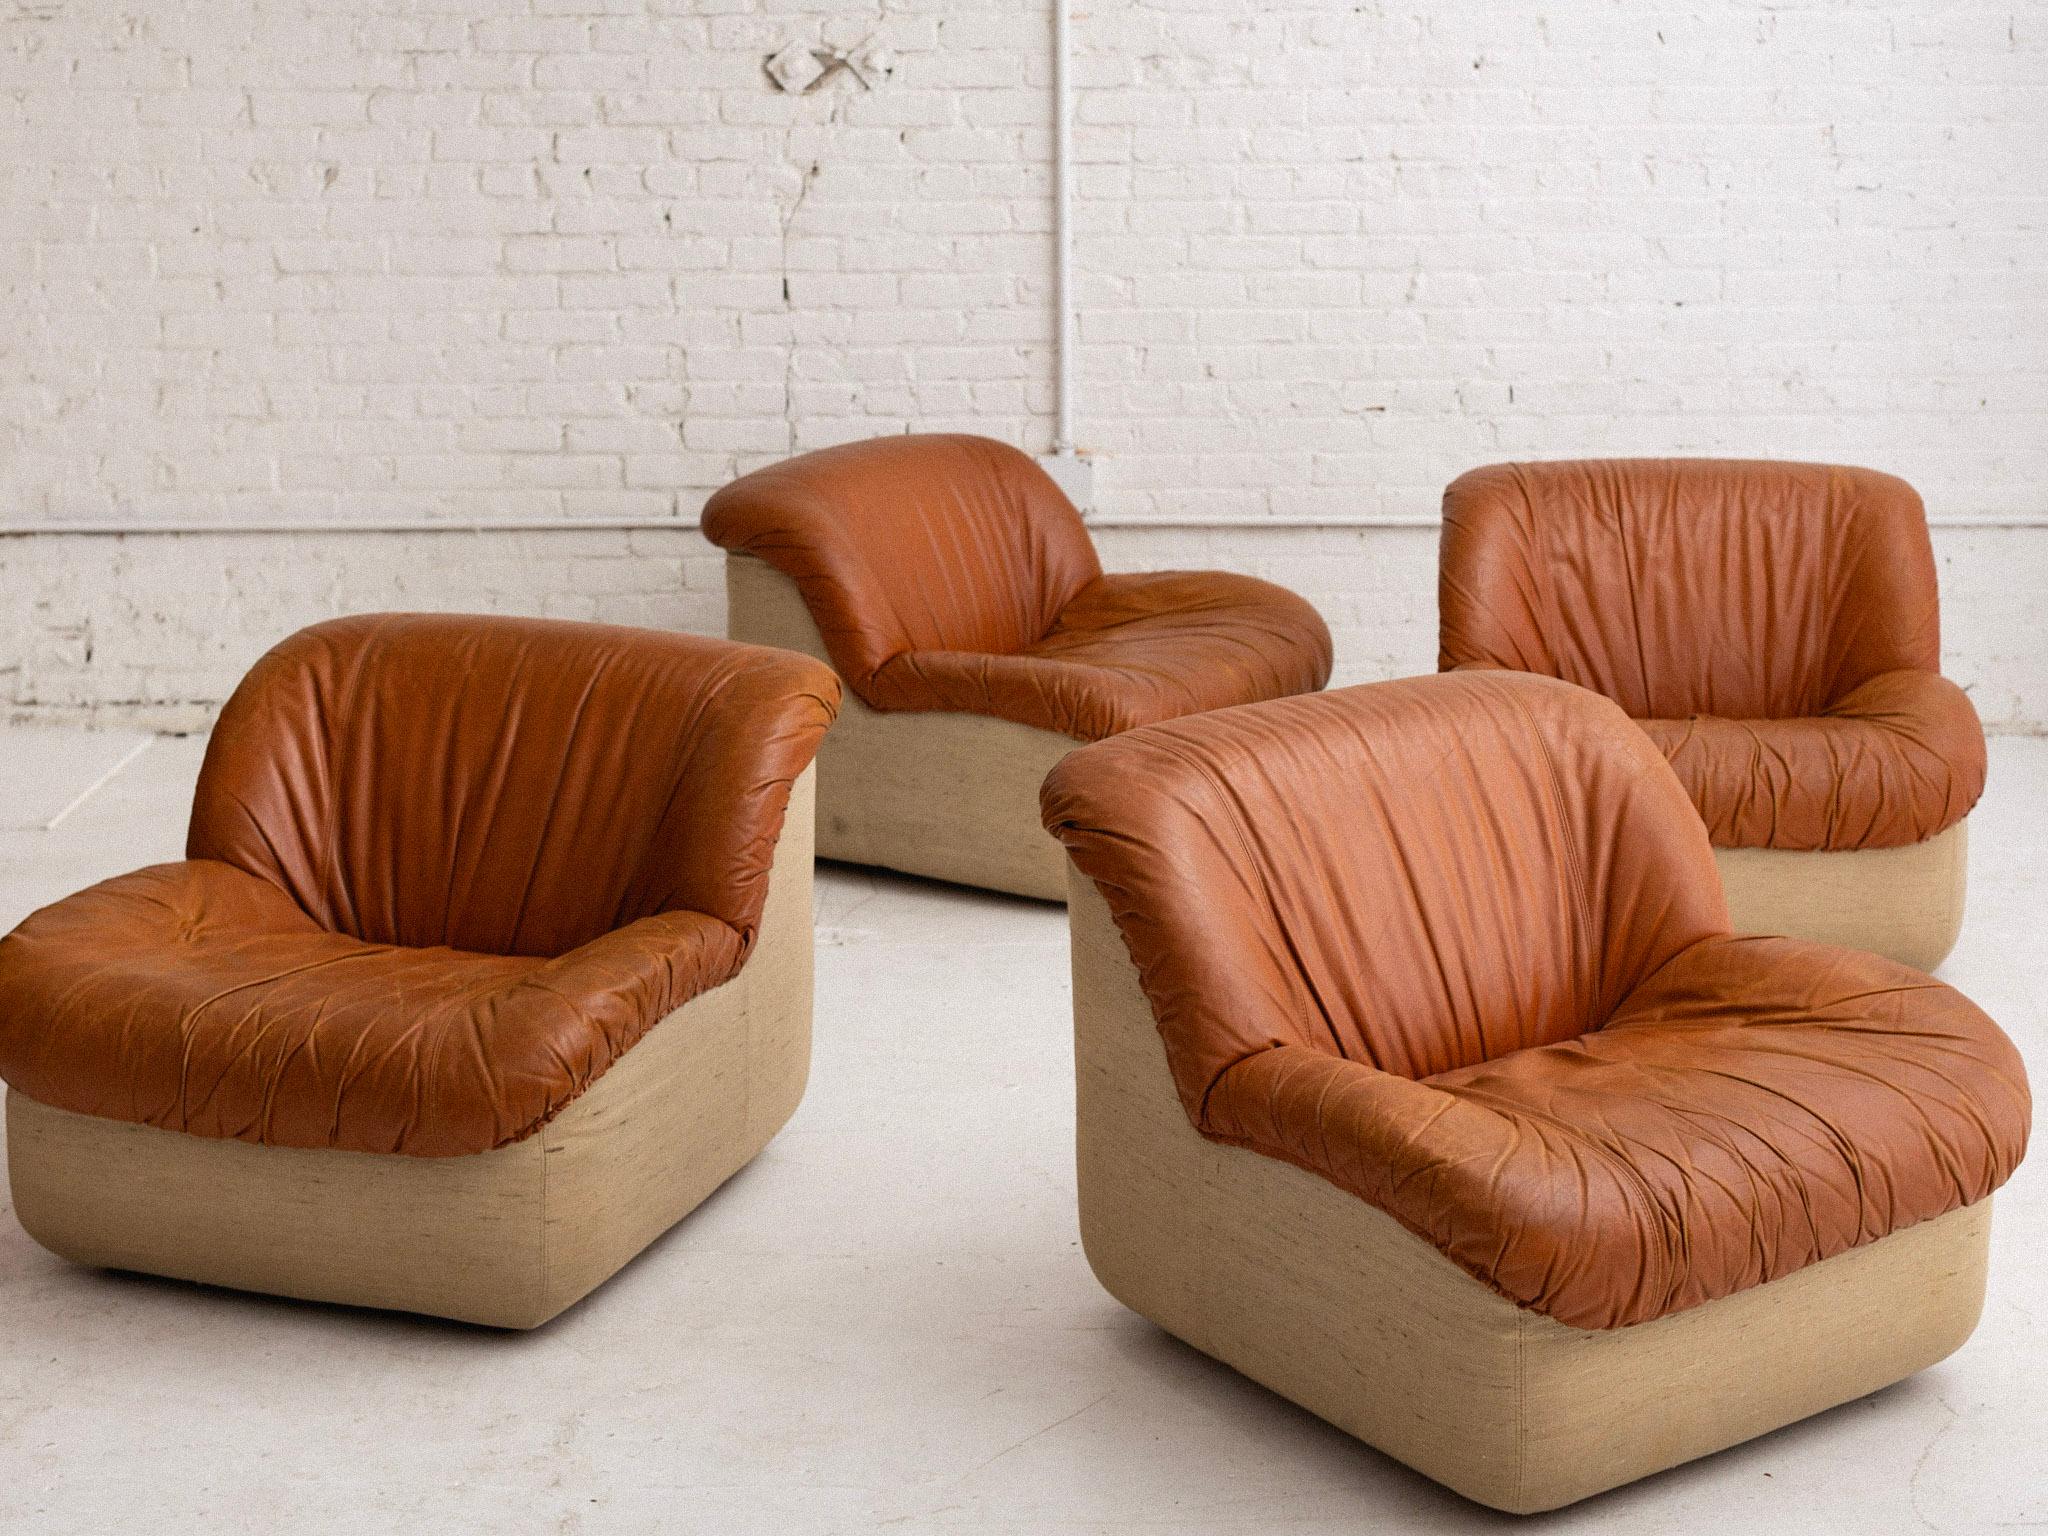 Henning Korch for Swan ‘Caprice’ Leather Chair / Modular Seating For Sale 4